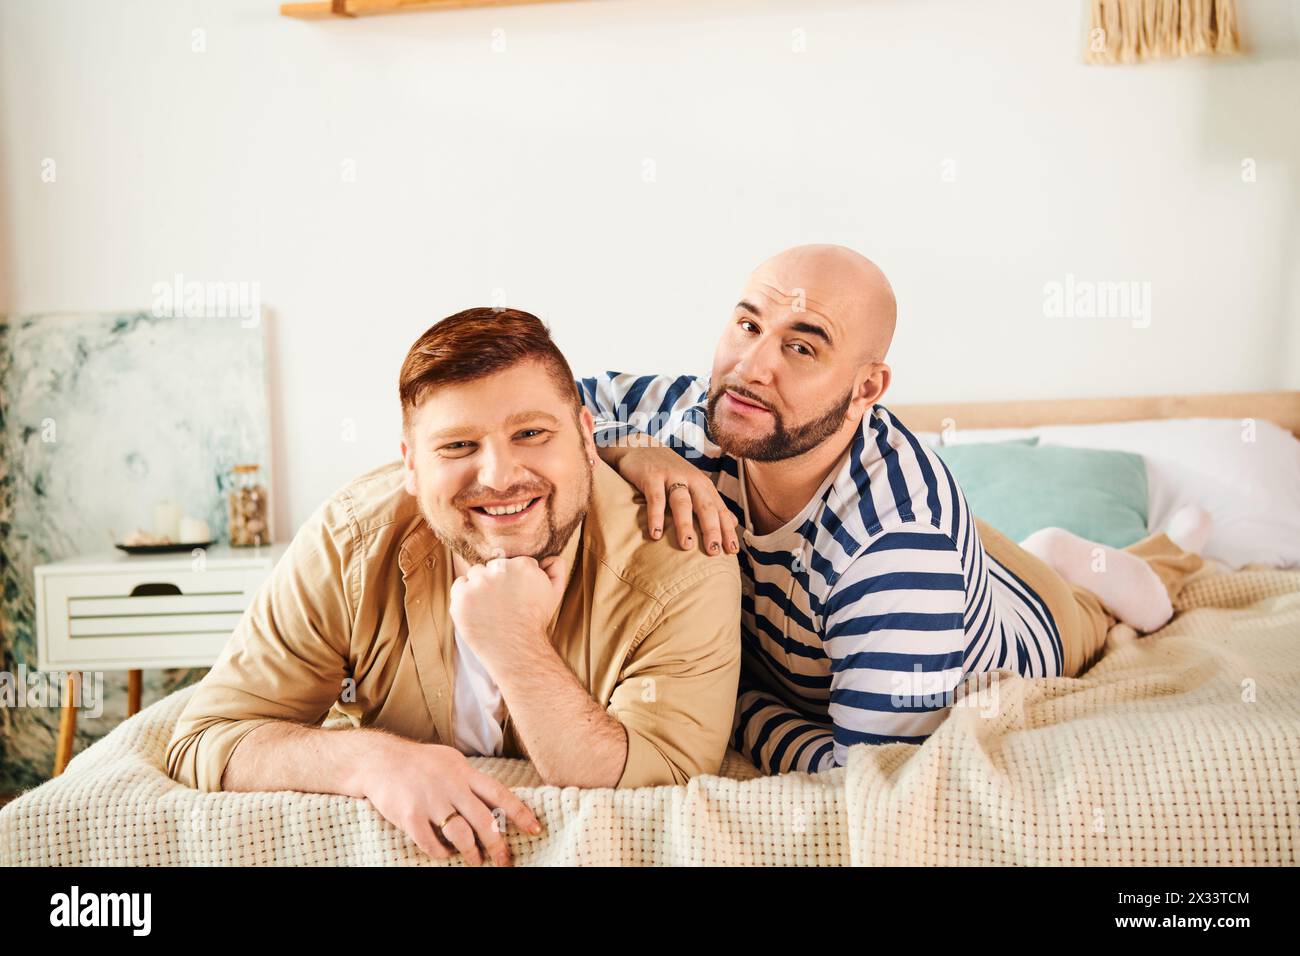 A couple of men enjoy a peaceful moment lounging on top of a bed. Stock Photo